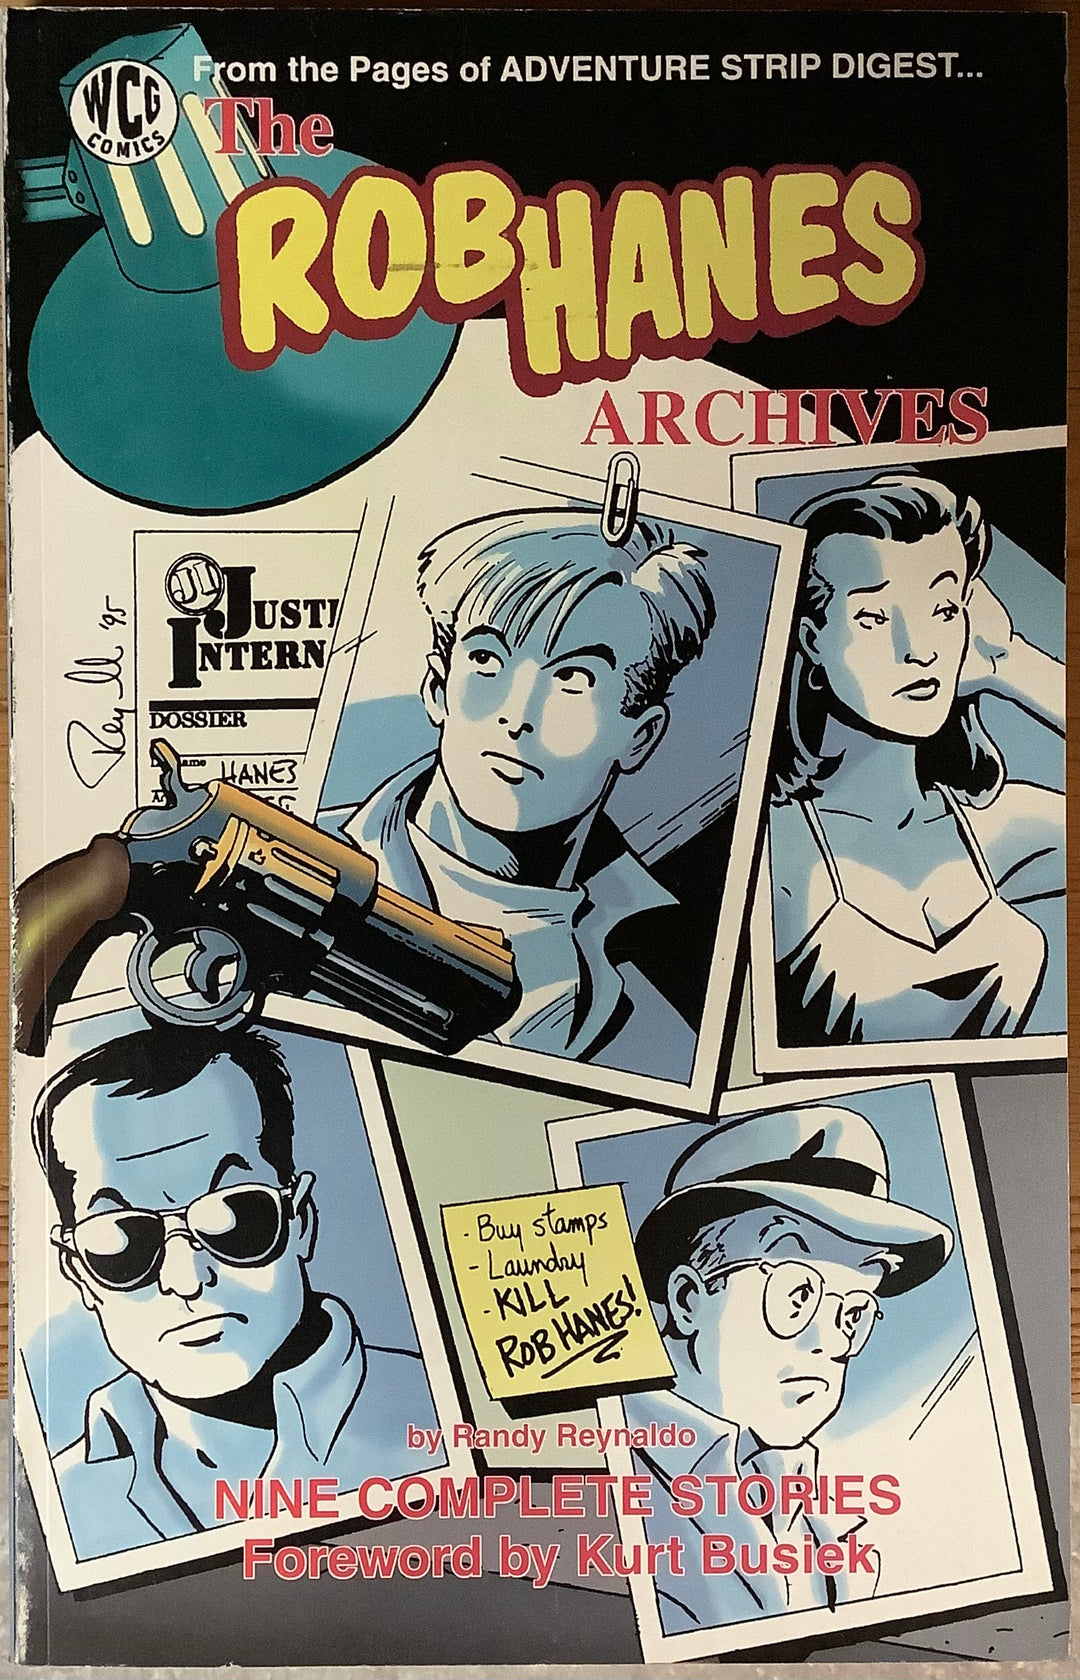 The Rob Hanes Archives Graphic Novel OXS-08